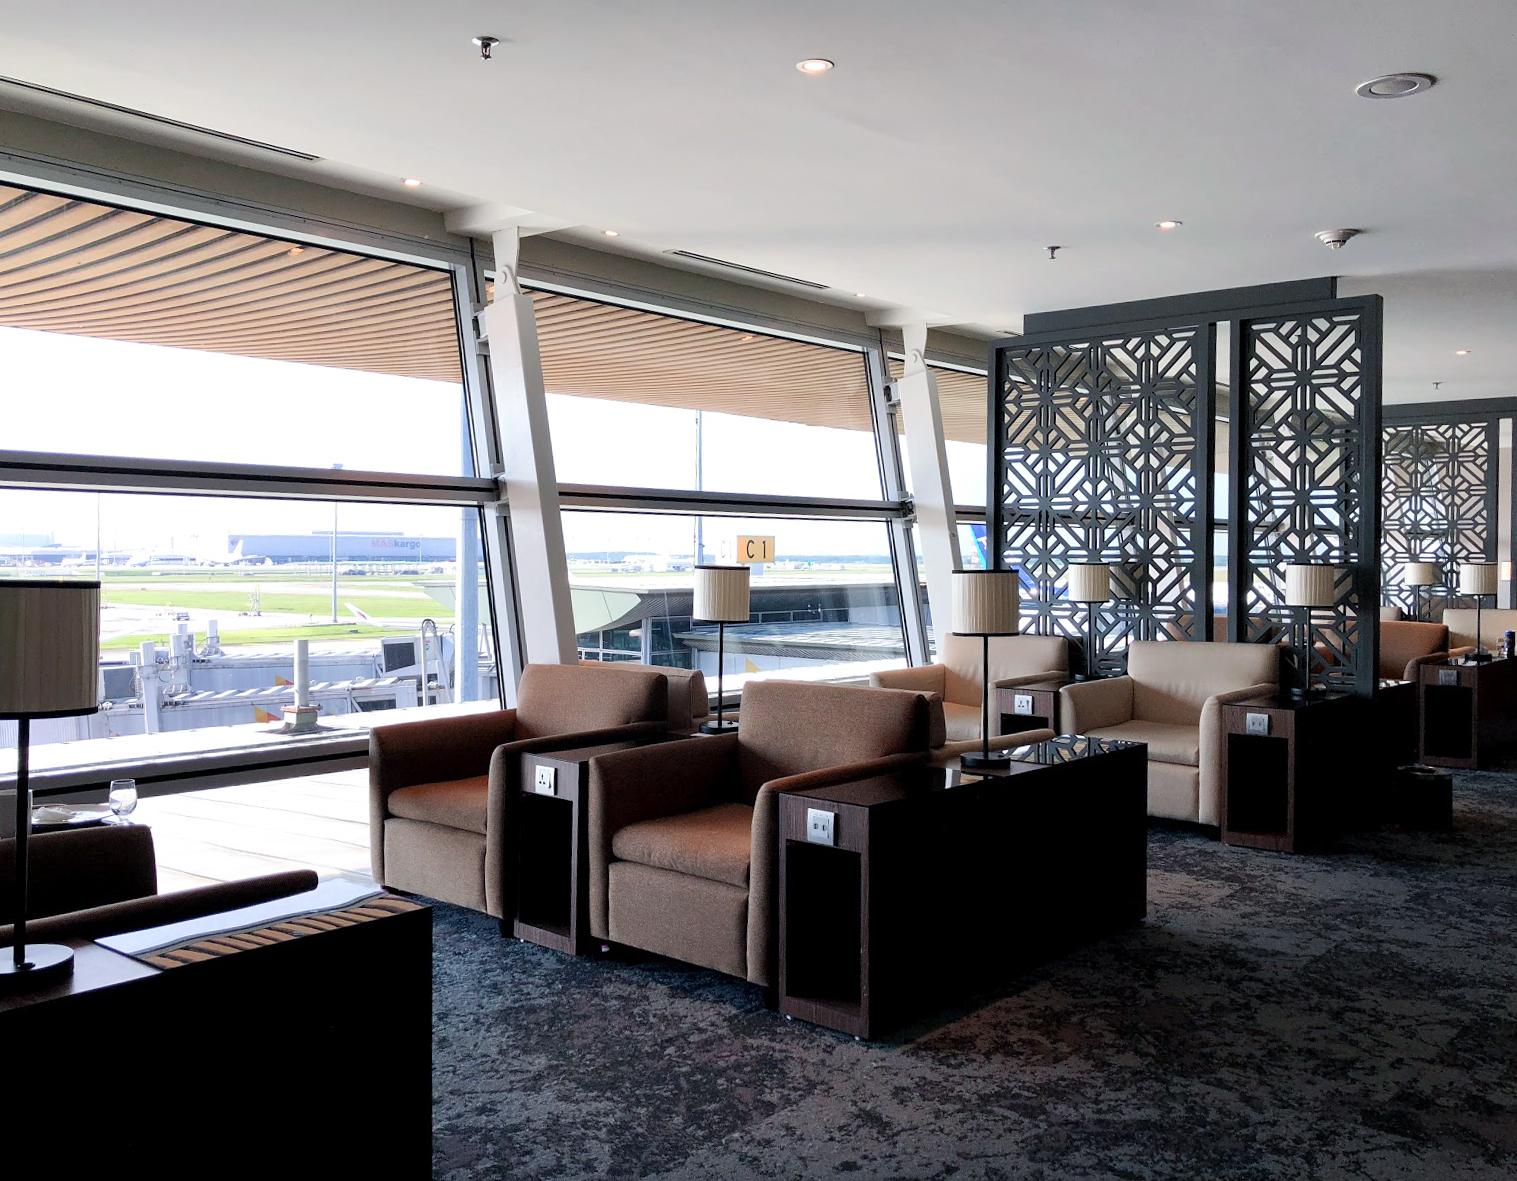 Malaysia Airlines Satellite Golden Lounge Kuala Lumpur seating area with tarmac view